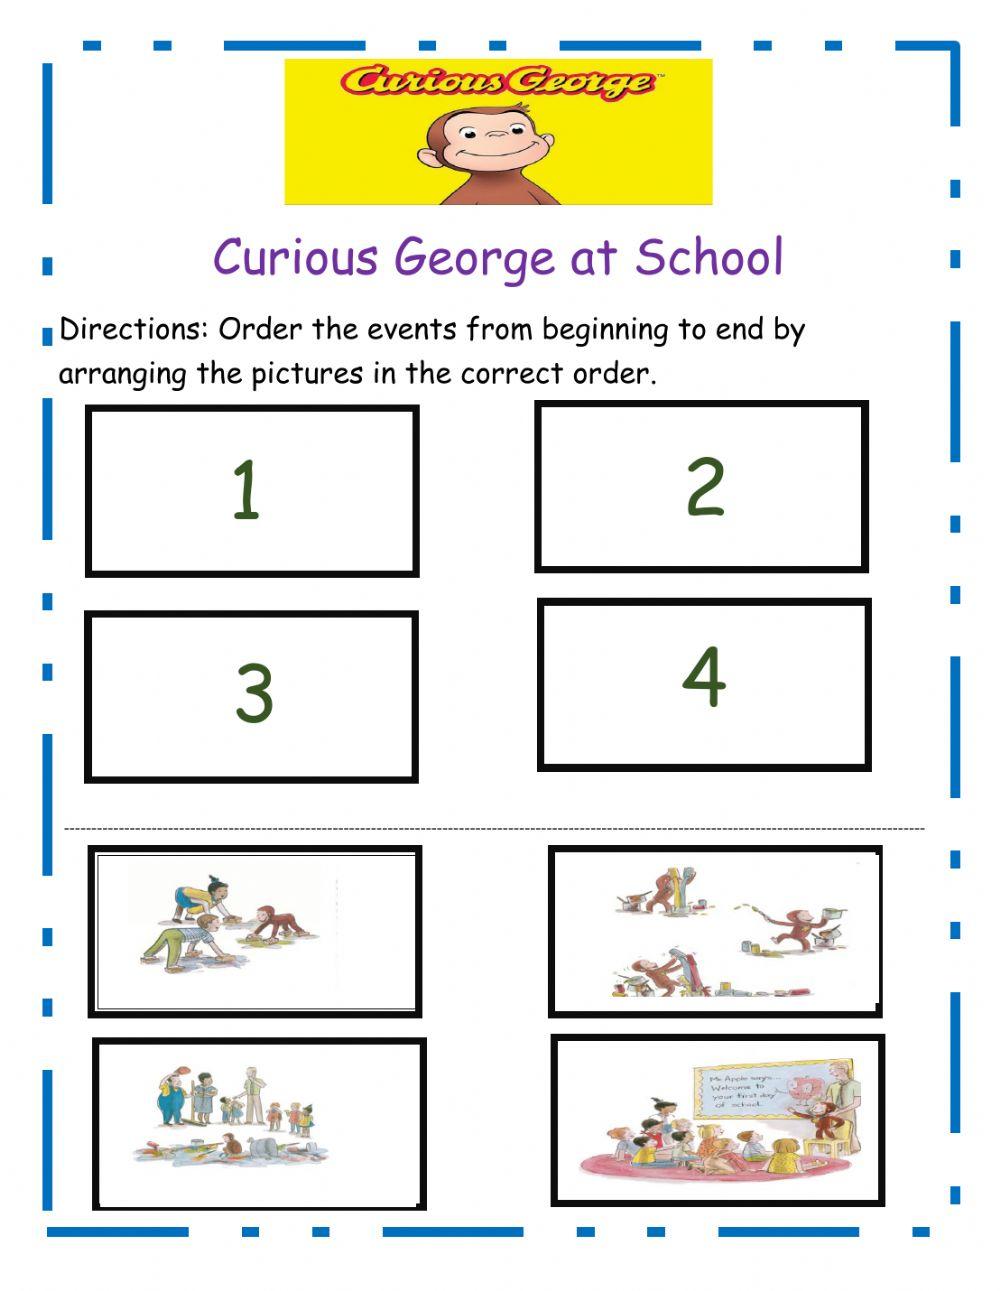 Curious George at School Sequencing